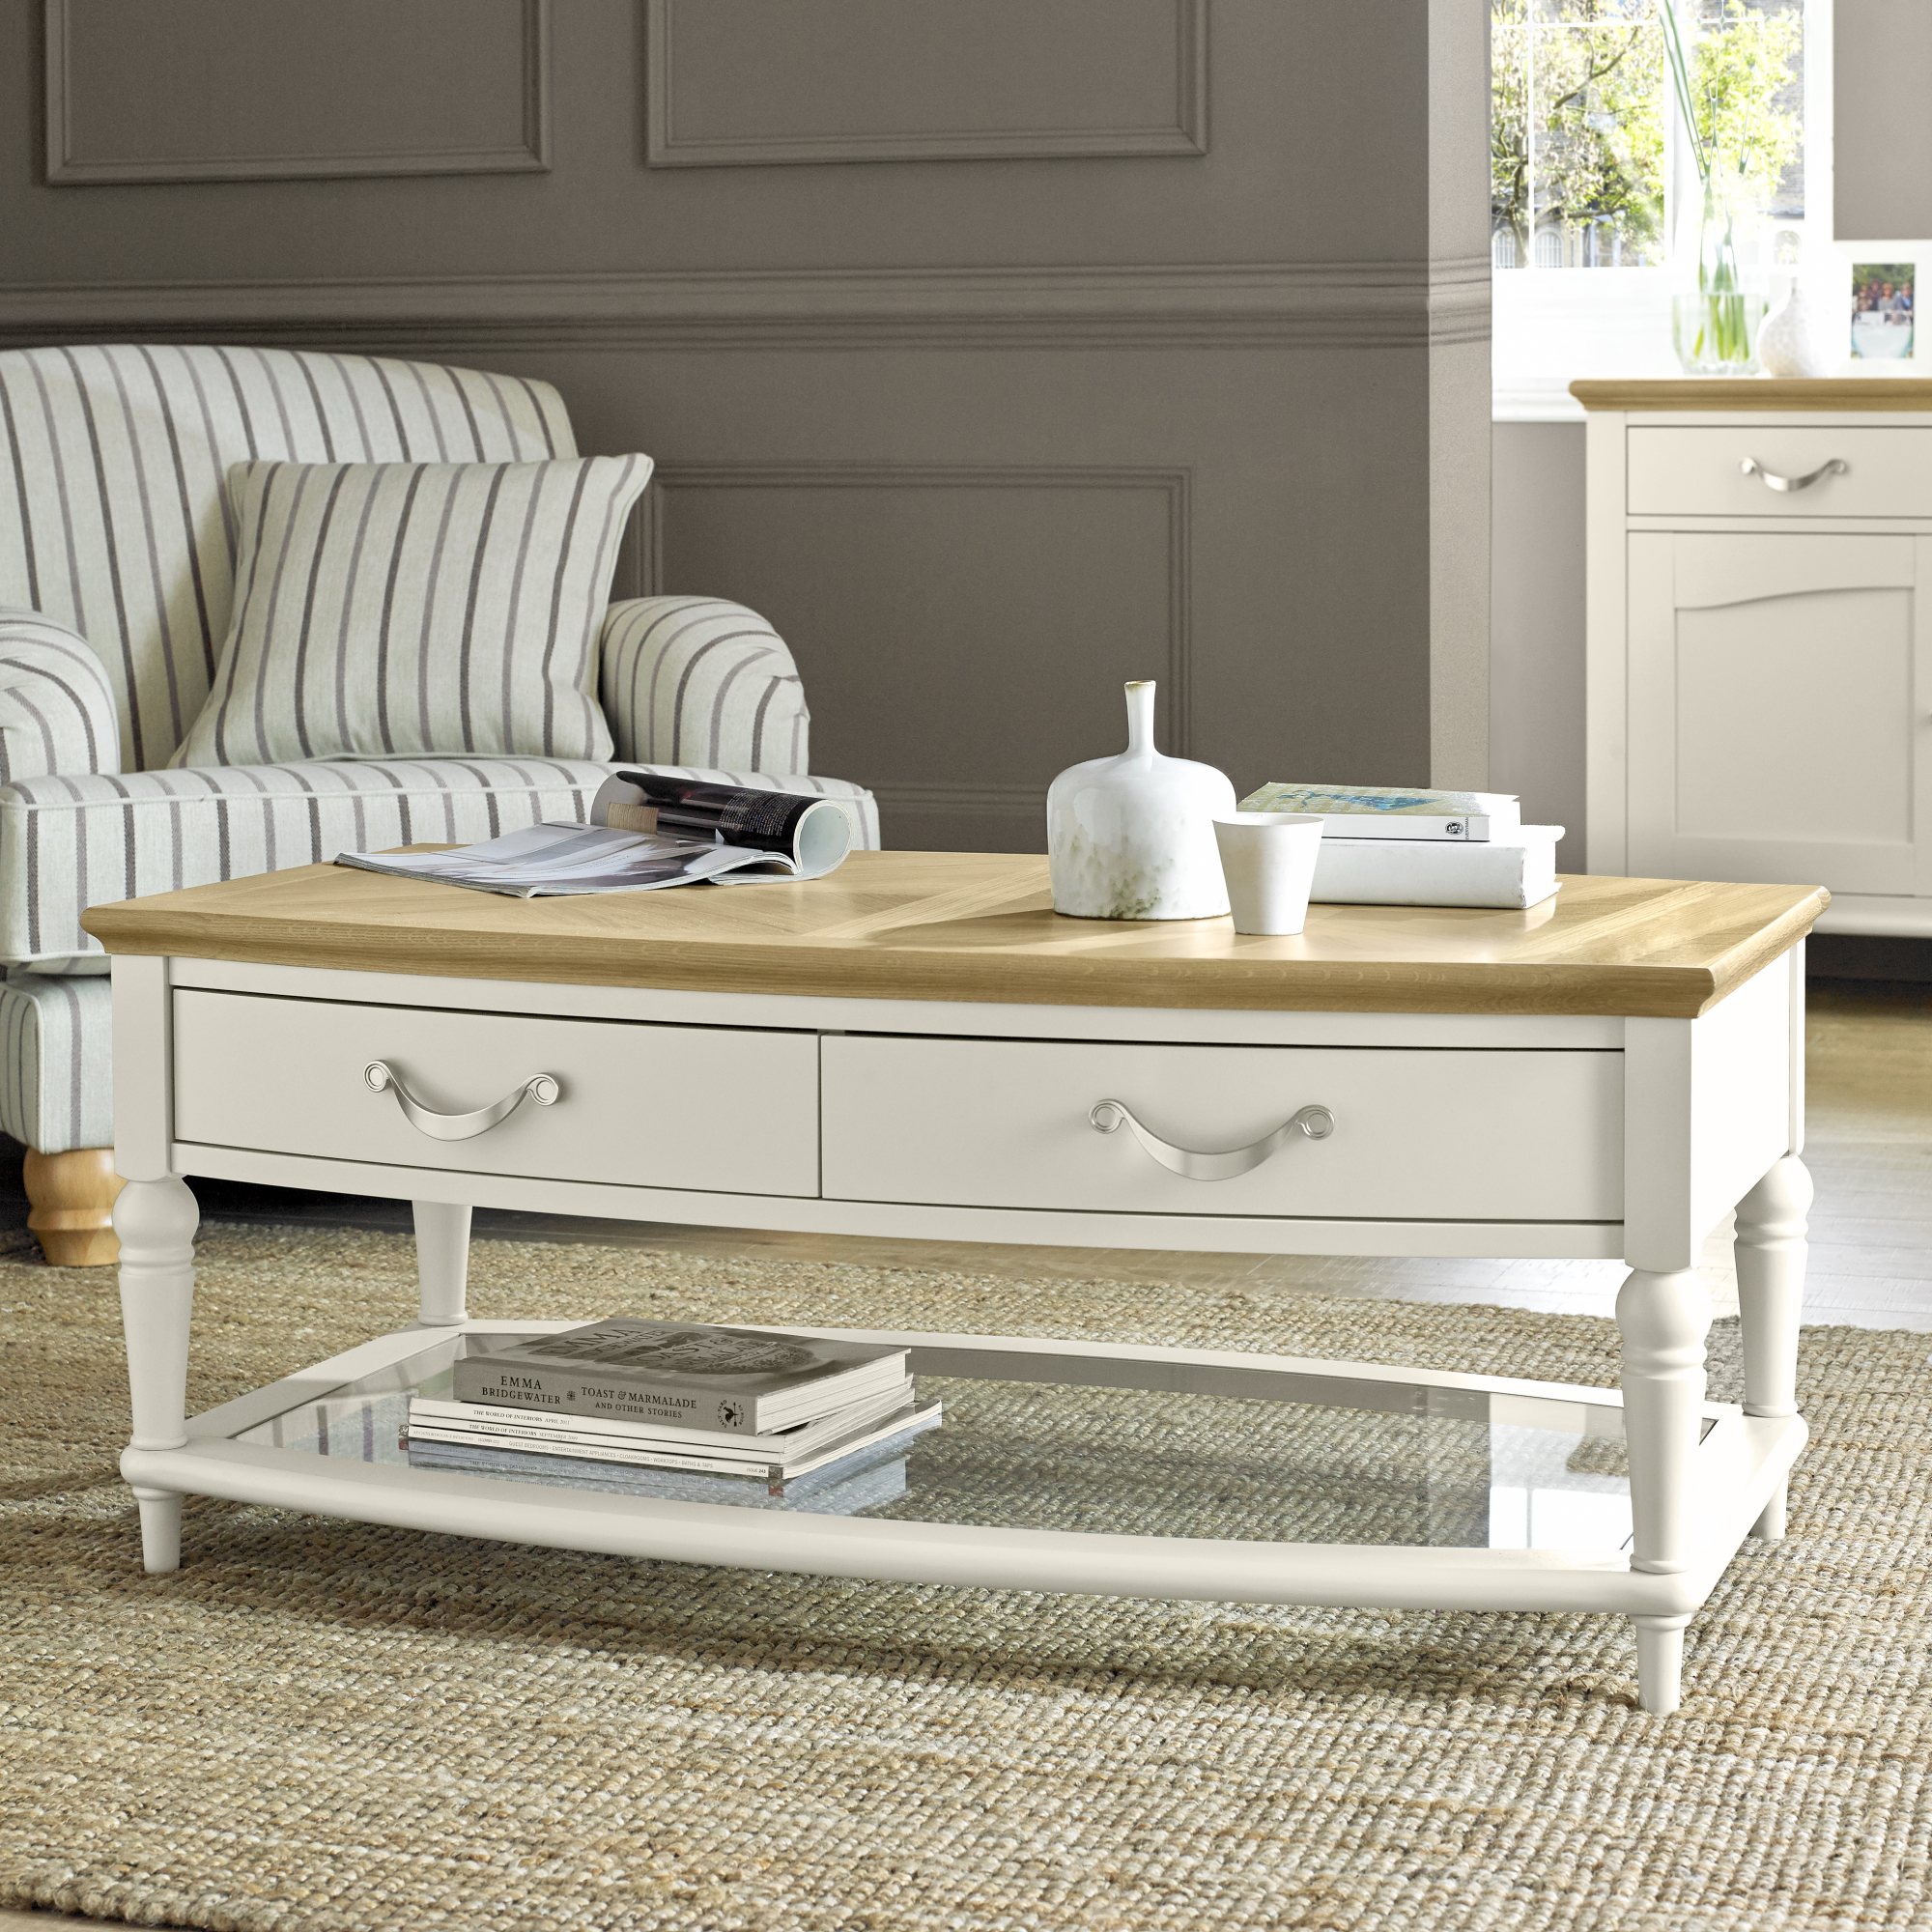 Montreux Pale Oak & Antique White Coffee Table With Drawers Bentley